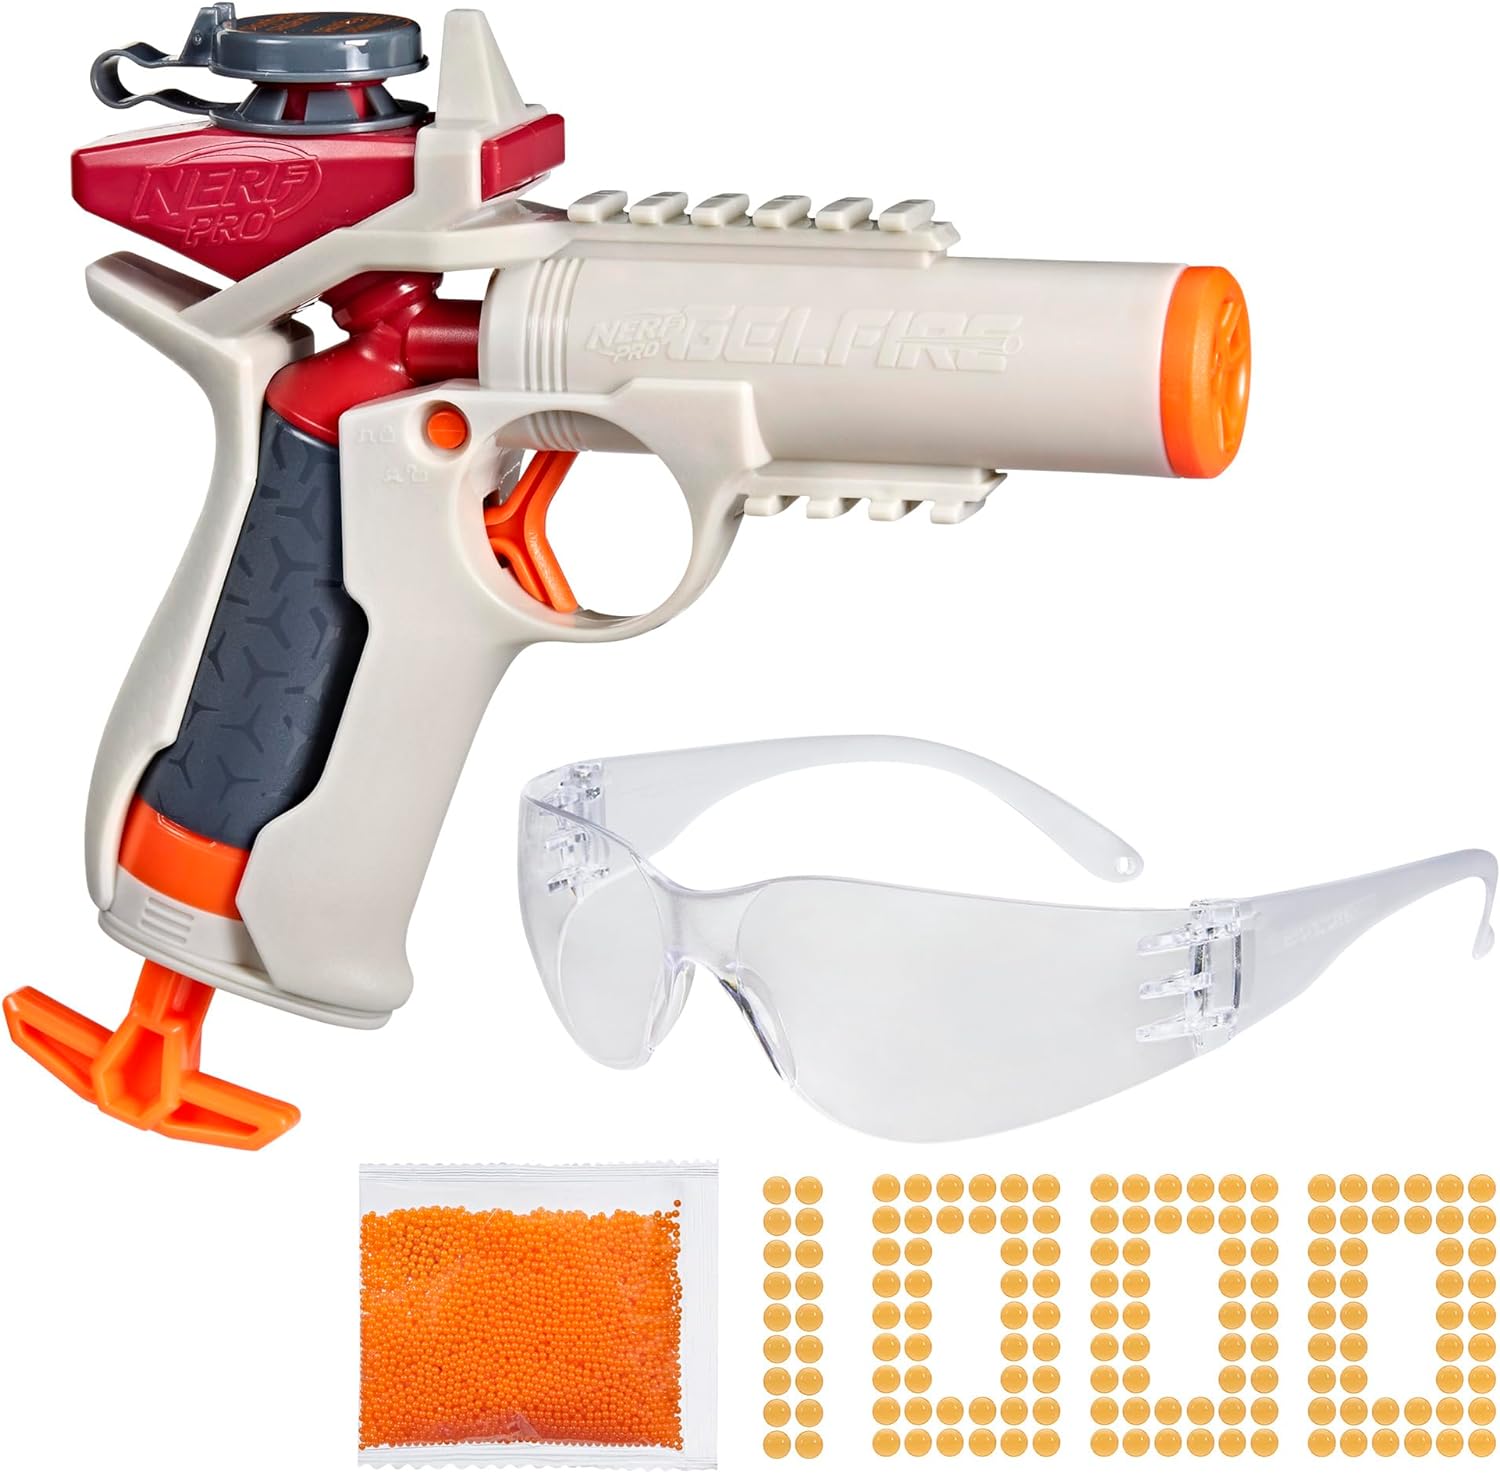 Nerf Pro Gelfire Ignitor Blaster, 1000 Gelfire Rounds, 60 Round Capacity, T-Pull Priming, Up to 150 FPS, Eyewear, Gifts for Teens Ages 14 